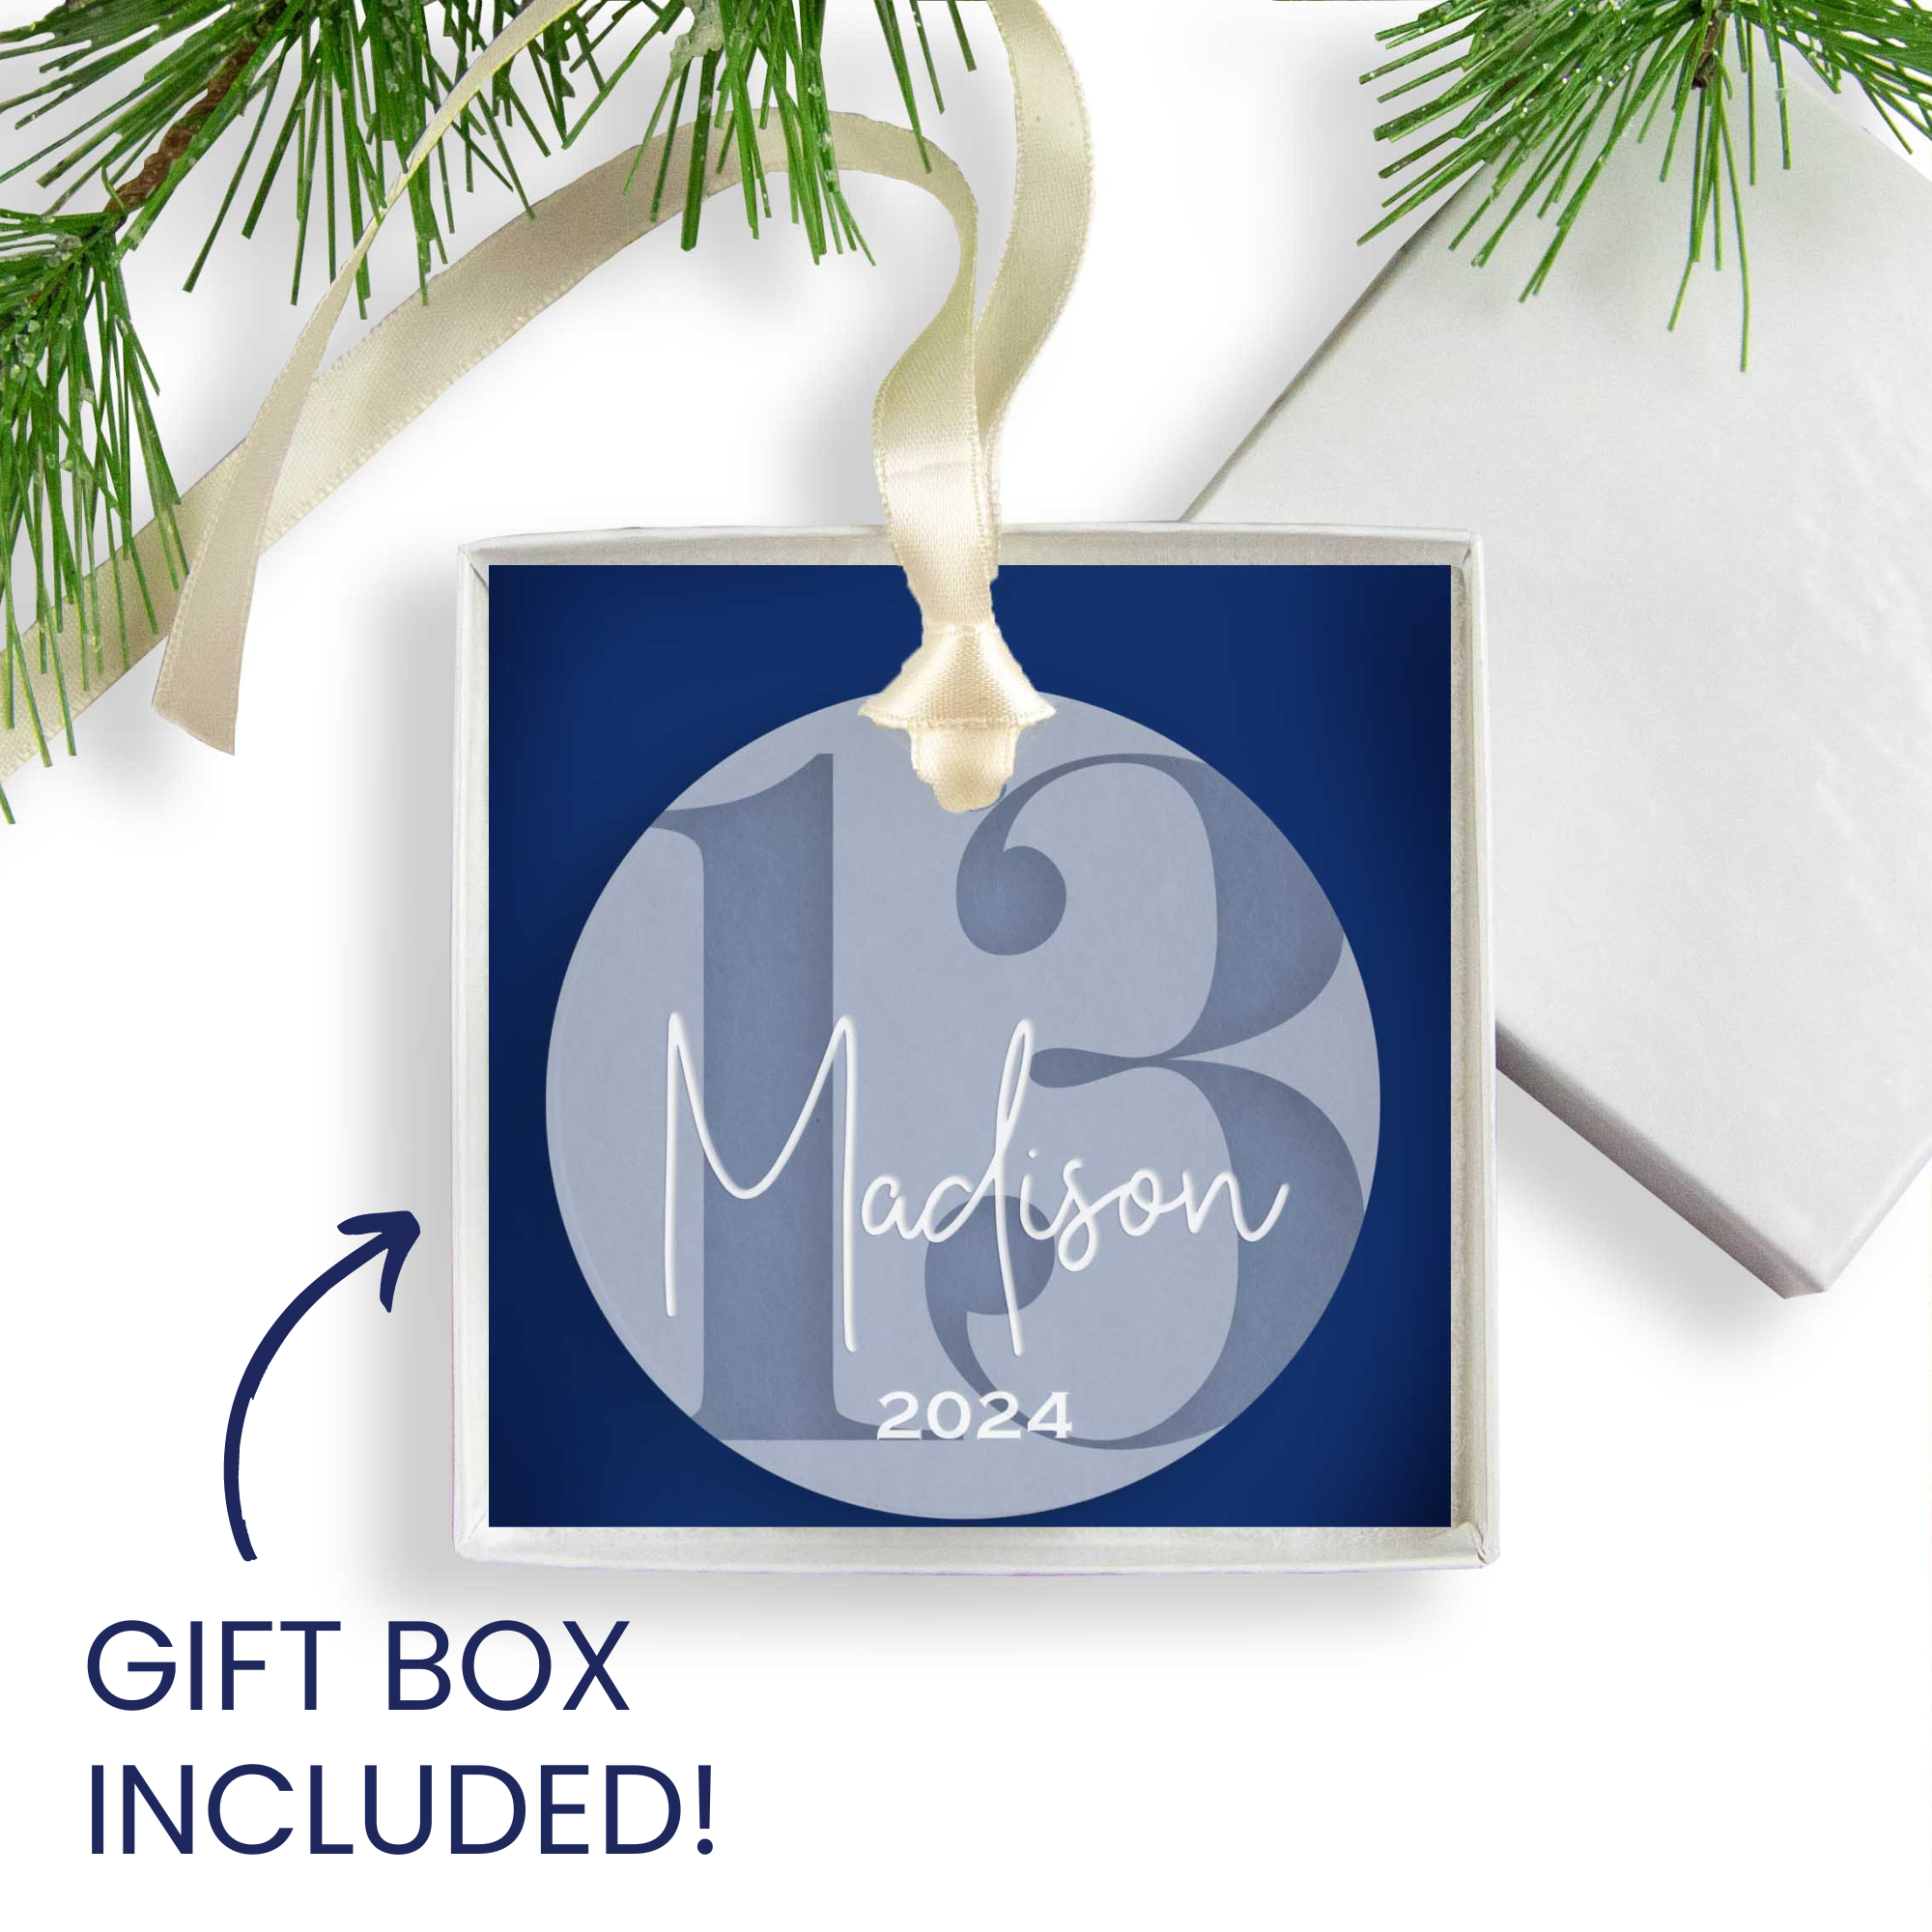 Personalized 13th Birthday Acrylic Christmas Ornament, Gift Box Included